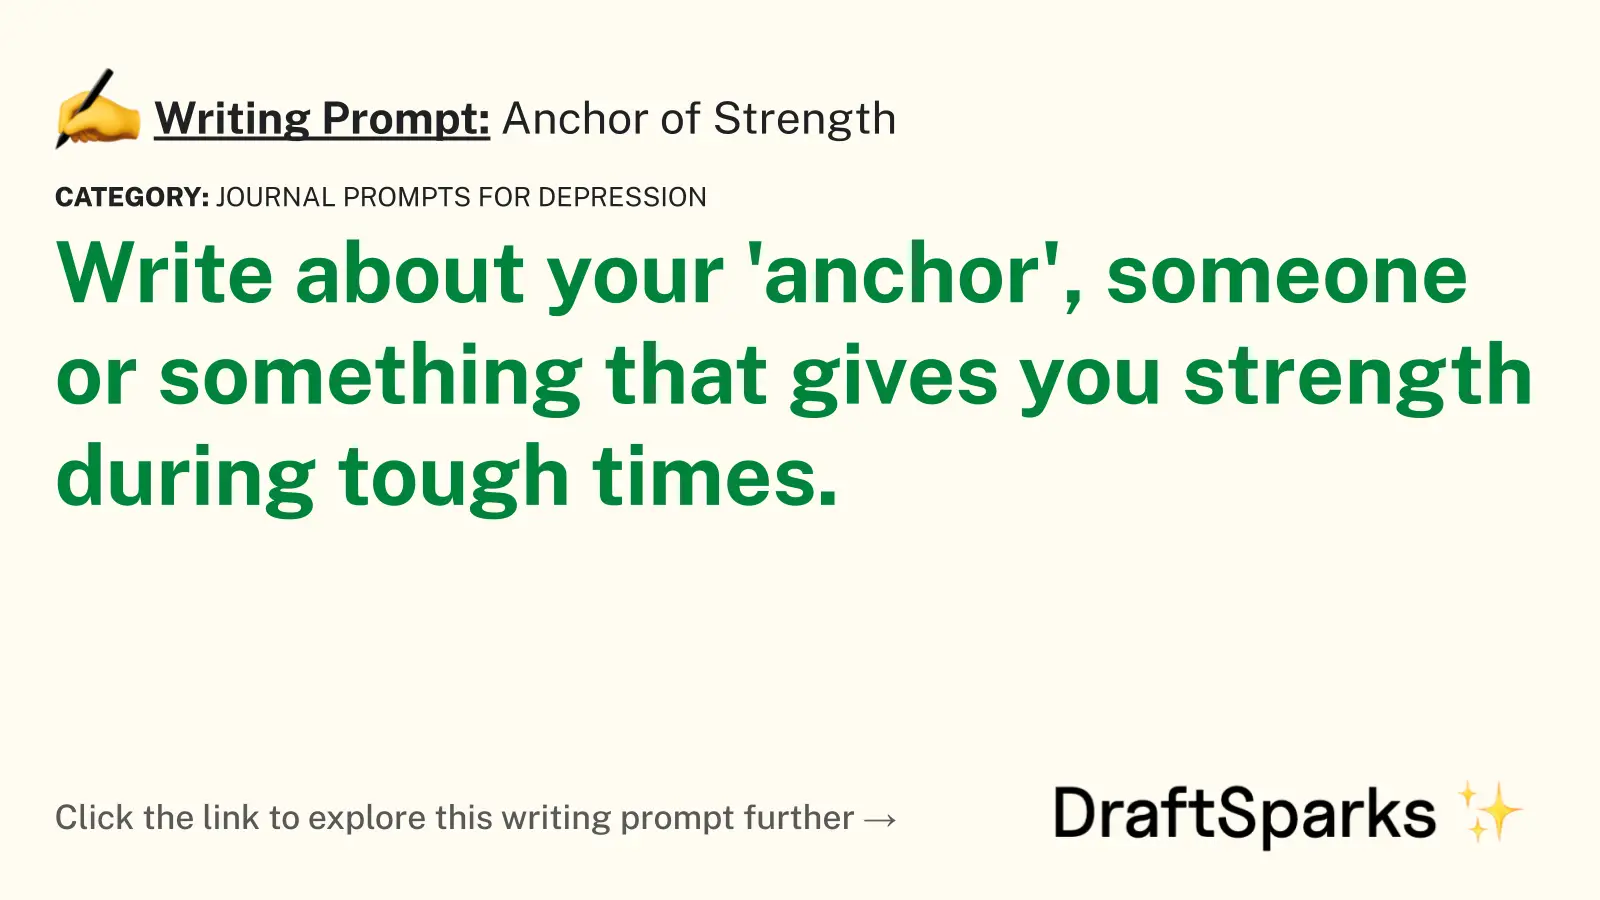 Anchor of Strength